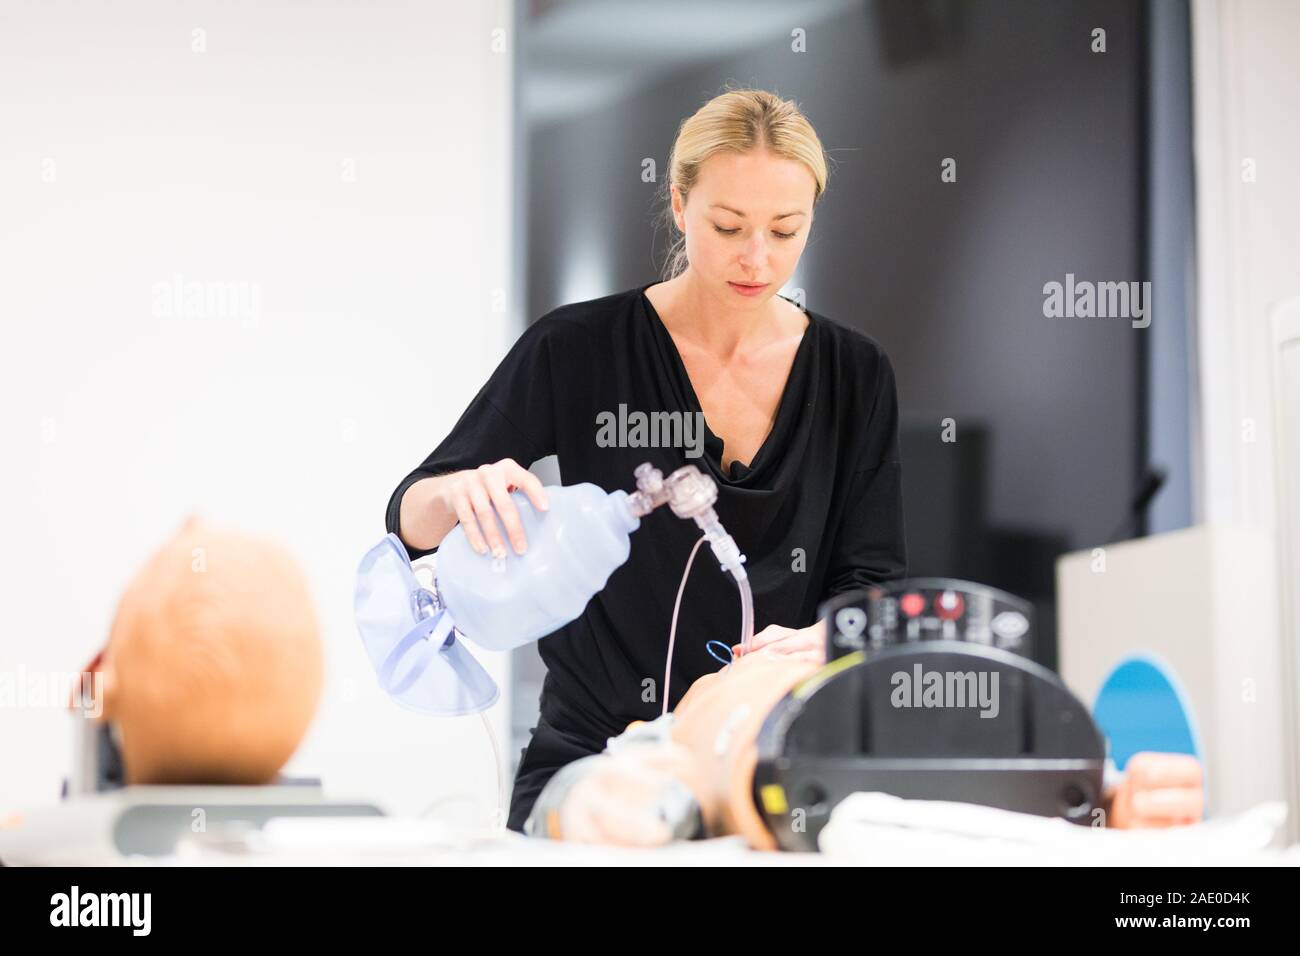 Medical doctor specialist expert displaying method of patient intubation technique on hands on medical education training and workshop Stock Photo